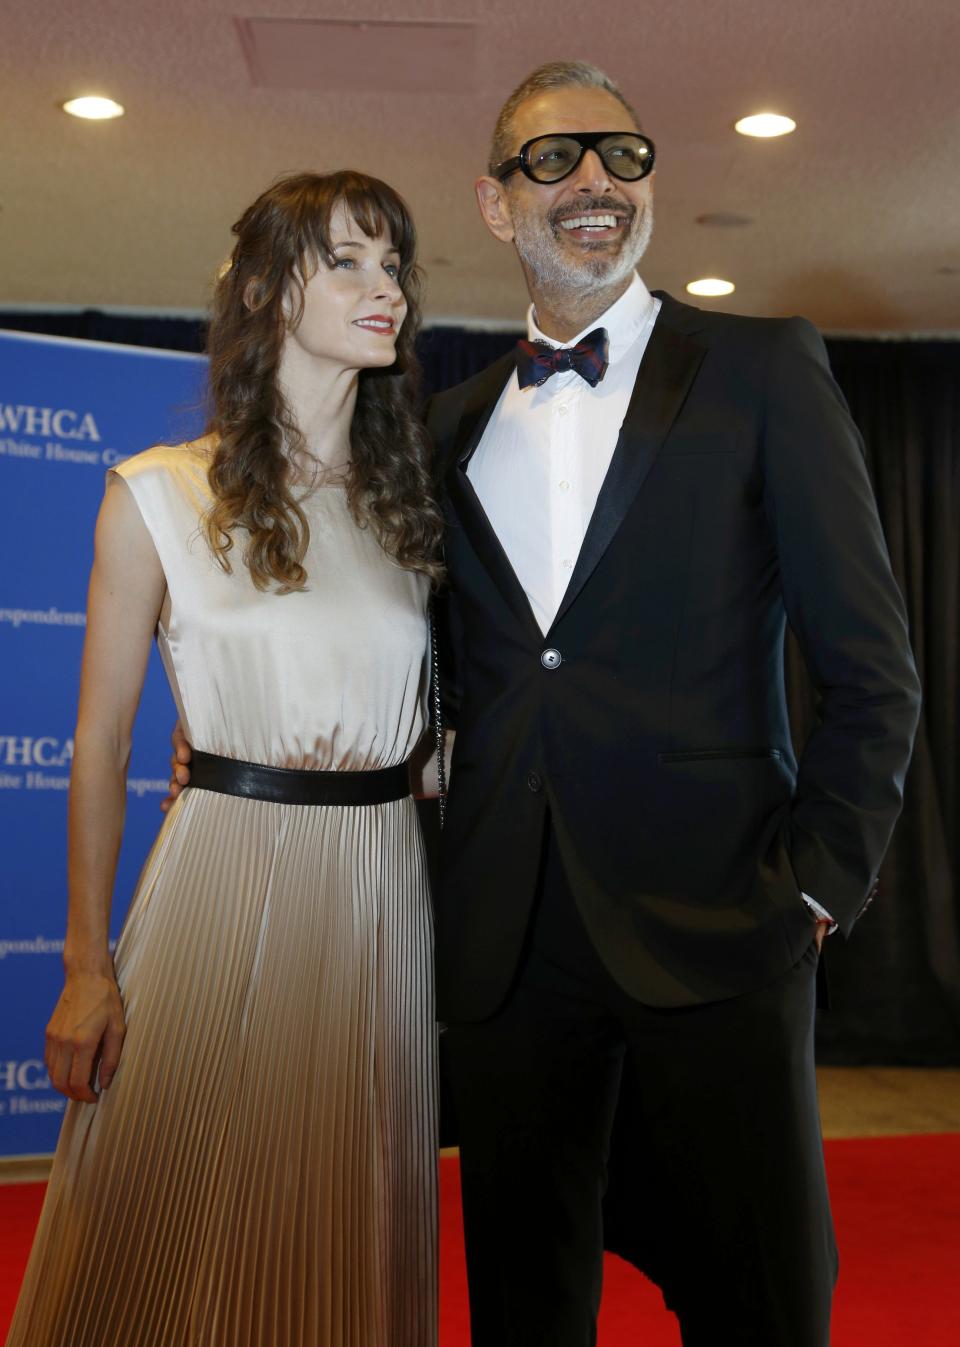 Actors Jeff Goldblum and Emilie Livingston arrive on the red carpet at the annual White House Correspondents' Association Dinner in Washington, May 3, 2014. (REUTERS/Jonathan Ernst)